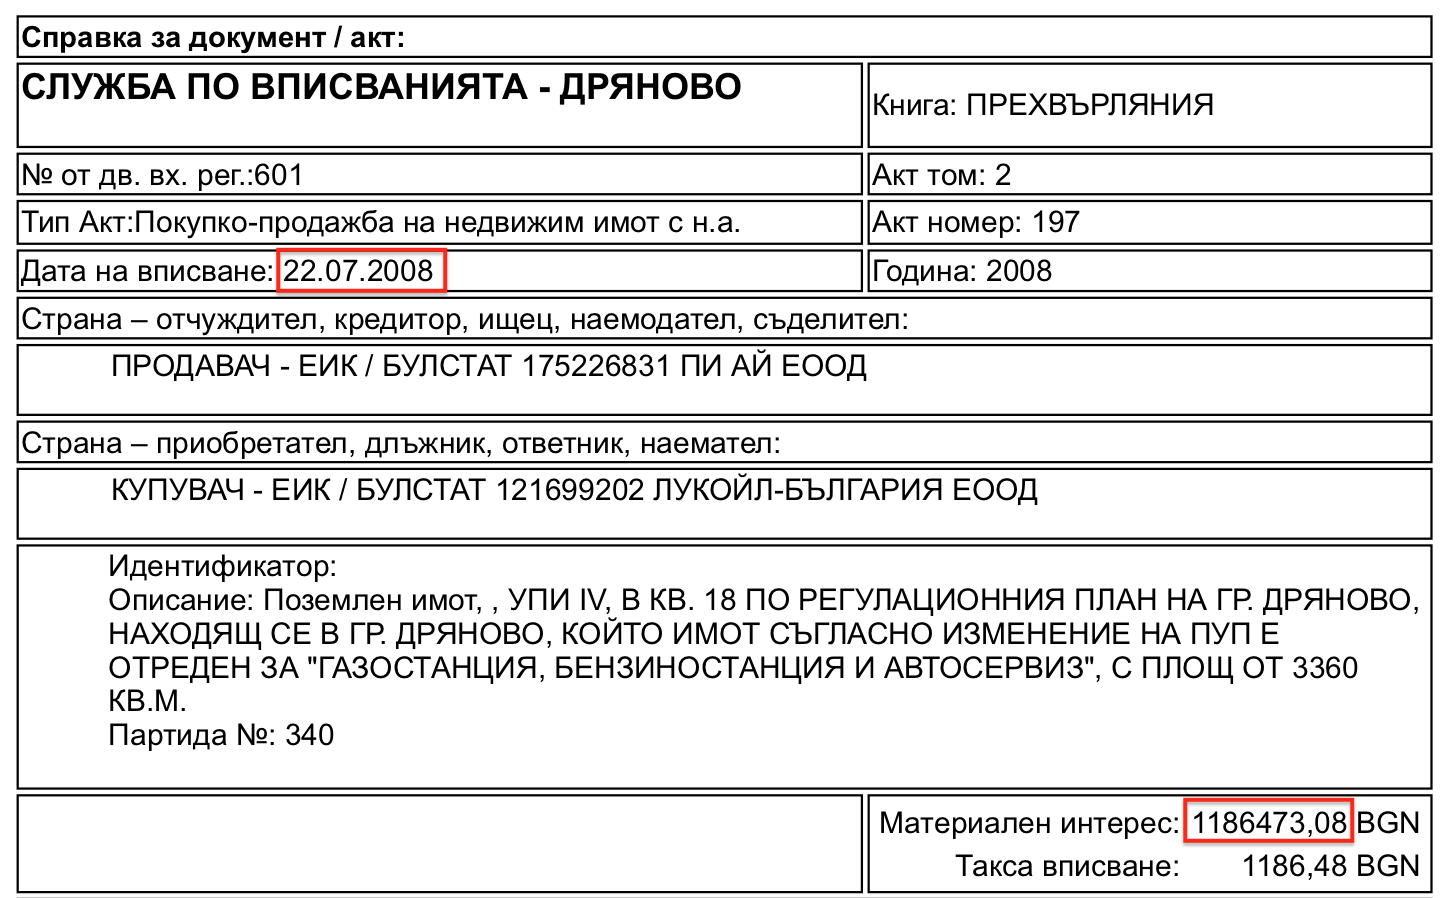 "GP Group" and "PI" have close business links and are associated with “Taki”  #GPGate: Owner of Land and Building on 59A ‘Cherni Vrah’ Blvd Drains Lukoil through Property Deals